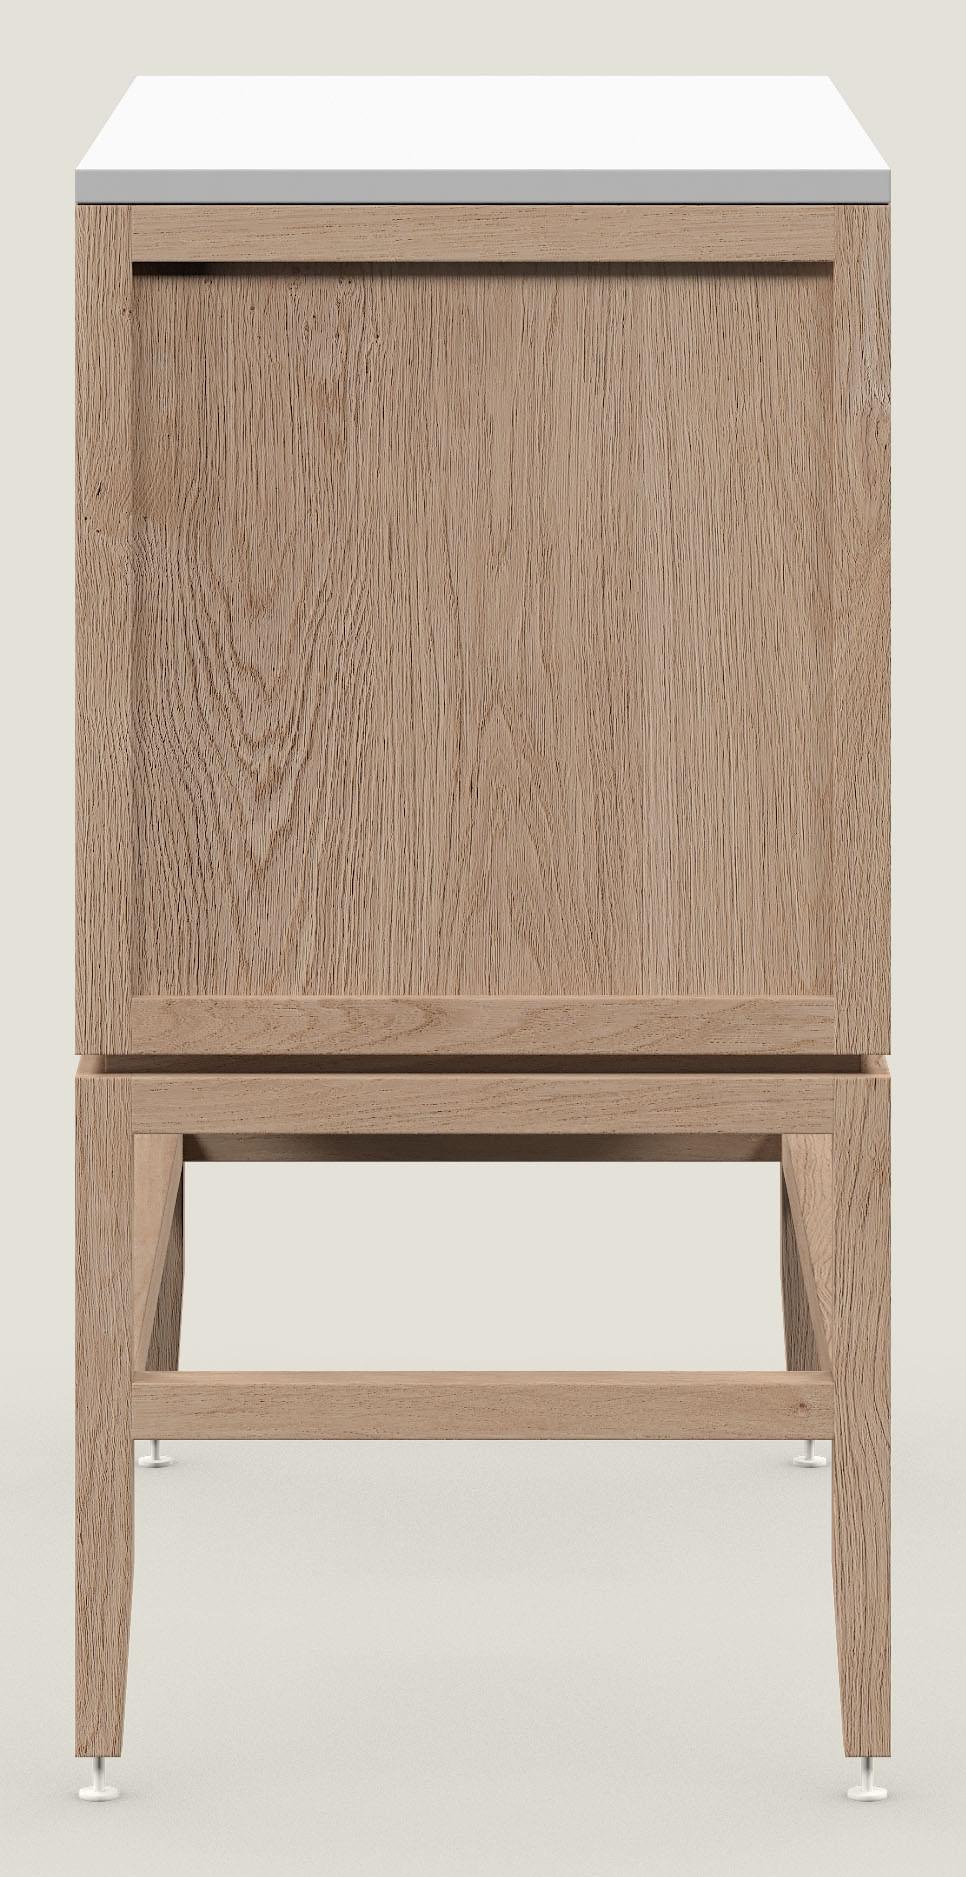 Coquo modular kitchen cabinet with two drawers in natural oak with metal handles.
